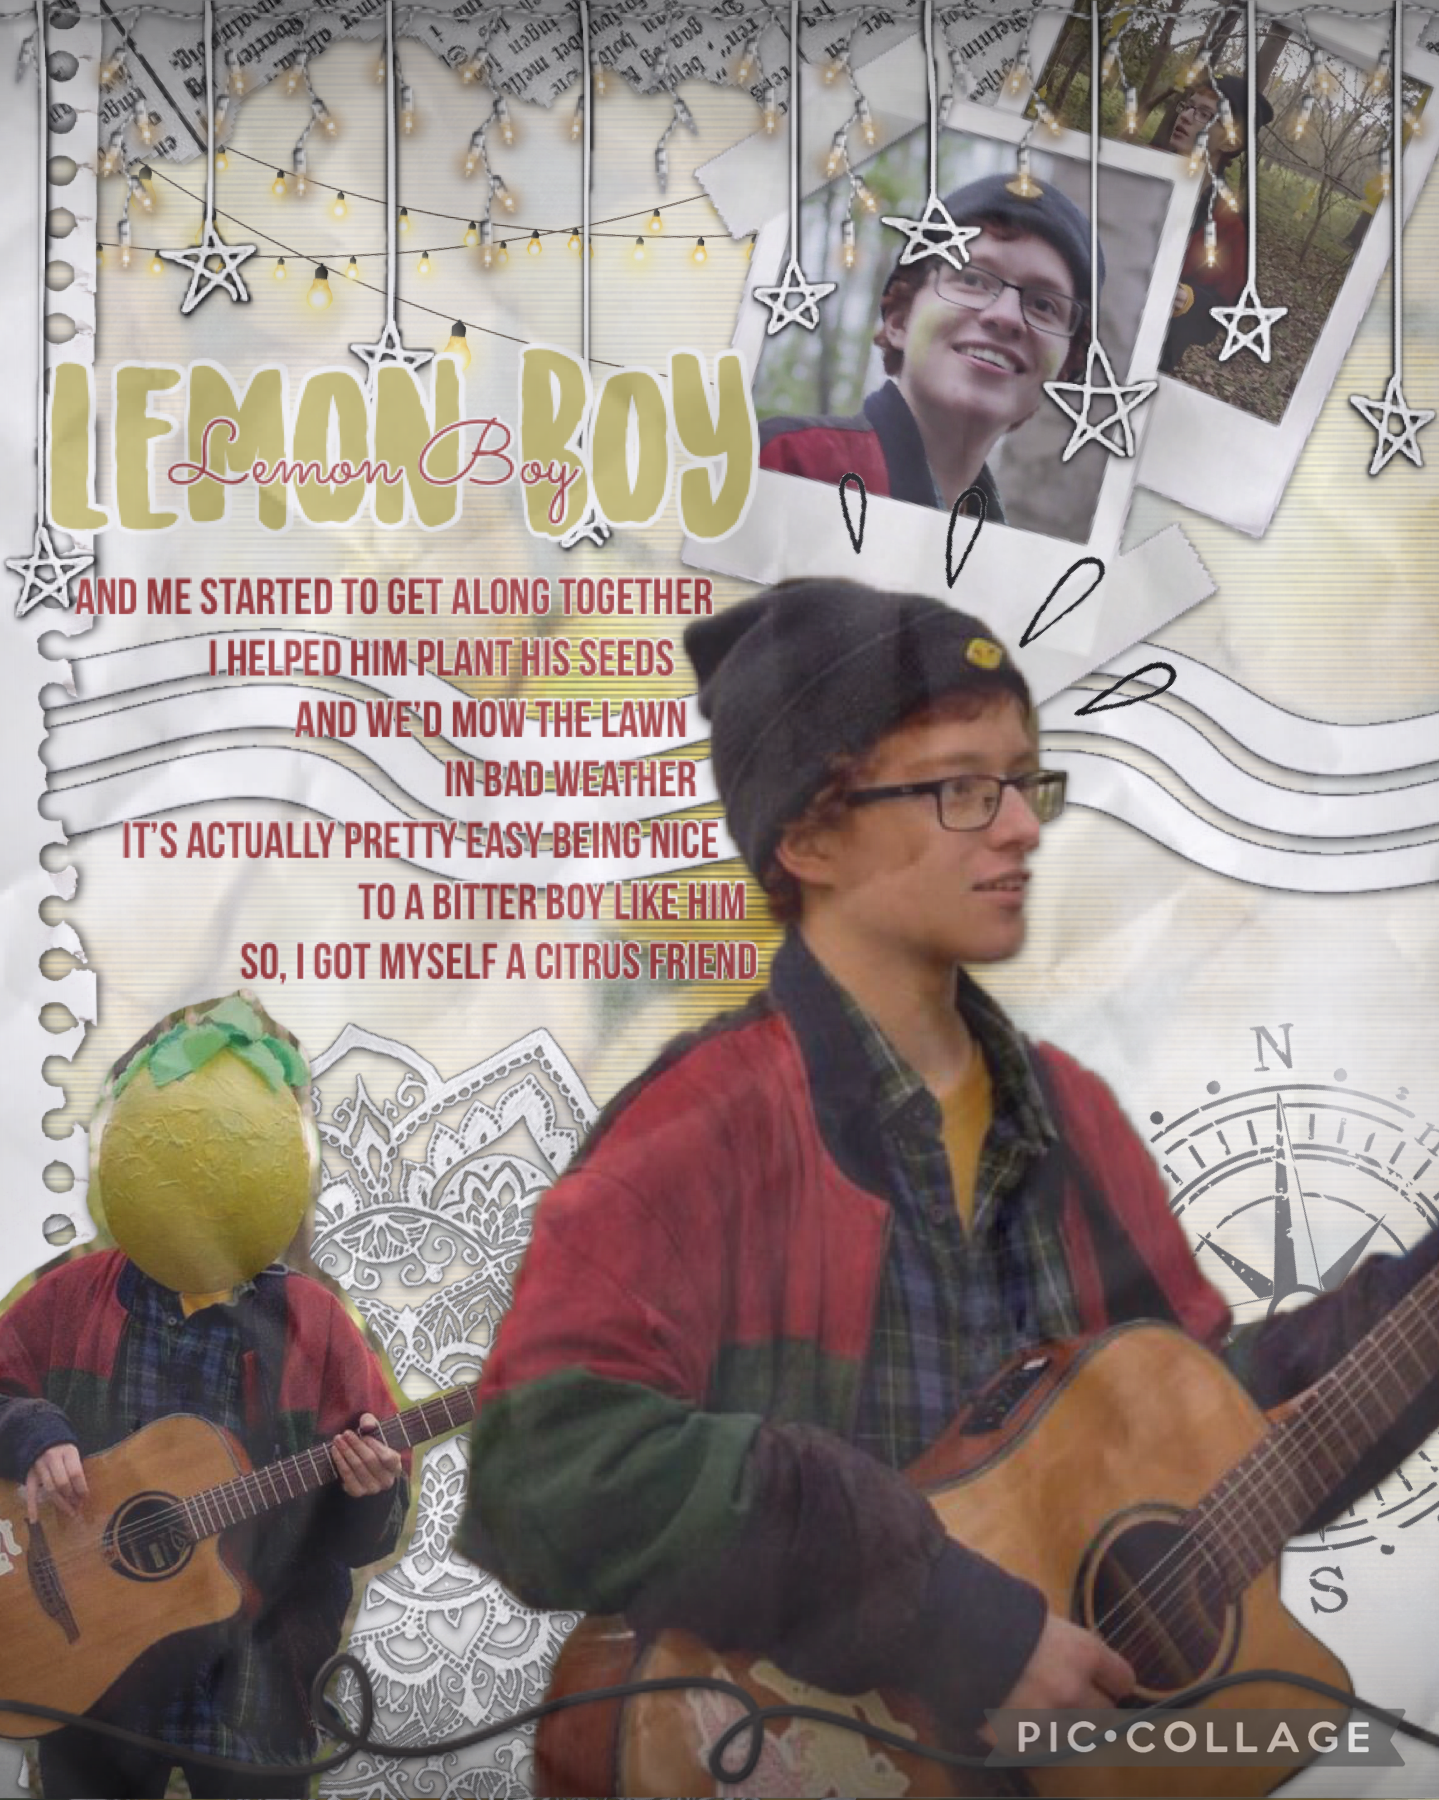 🍋 TAP 🍋
🍋 Cavetown Lemon Boy Collage!! 🍋
🍋 im thinking about doing a mood board series… would u guys be into that? 🍋
🍋 my dad asked me how i slept last night and i said “idk i was sleeping” 🍋
🍋 QOTD- favourite album? 🍋
🍋 AOTD- Sleepyhead by cavetown!! 🍋
🍋